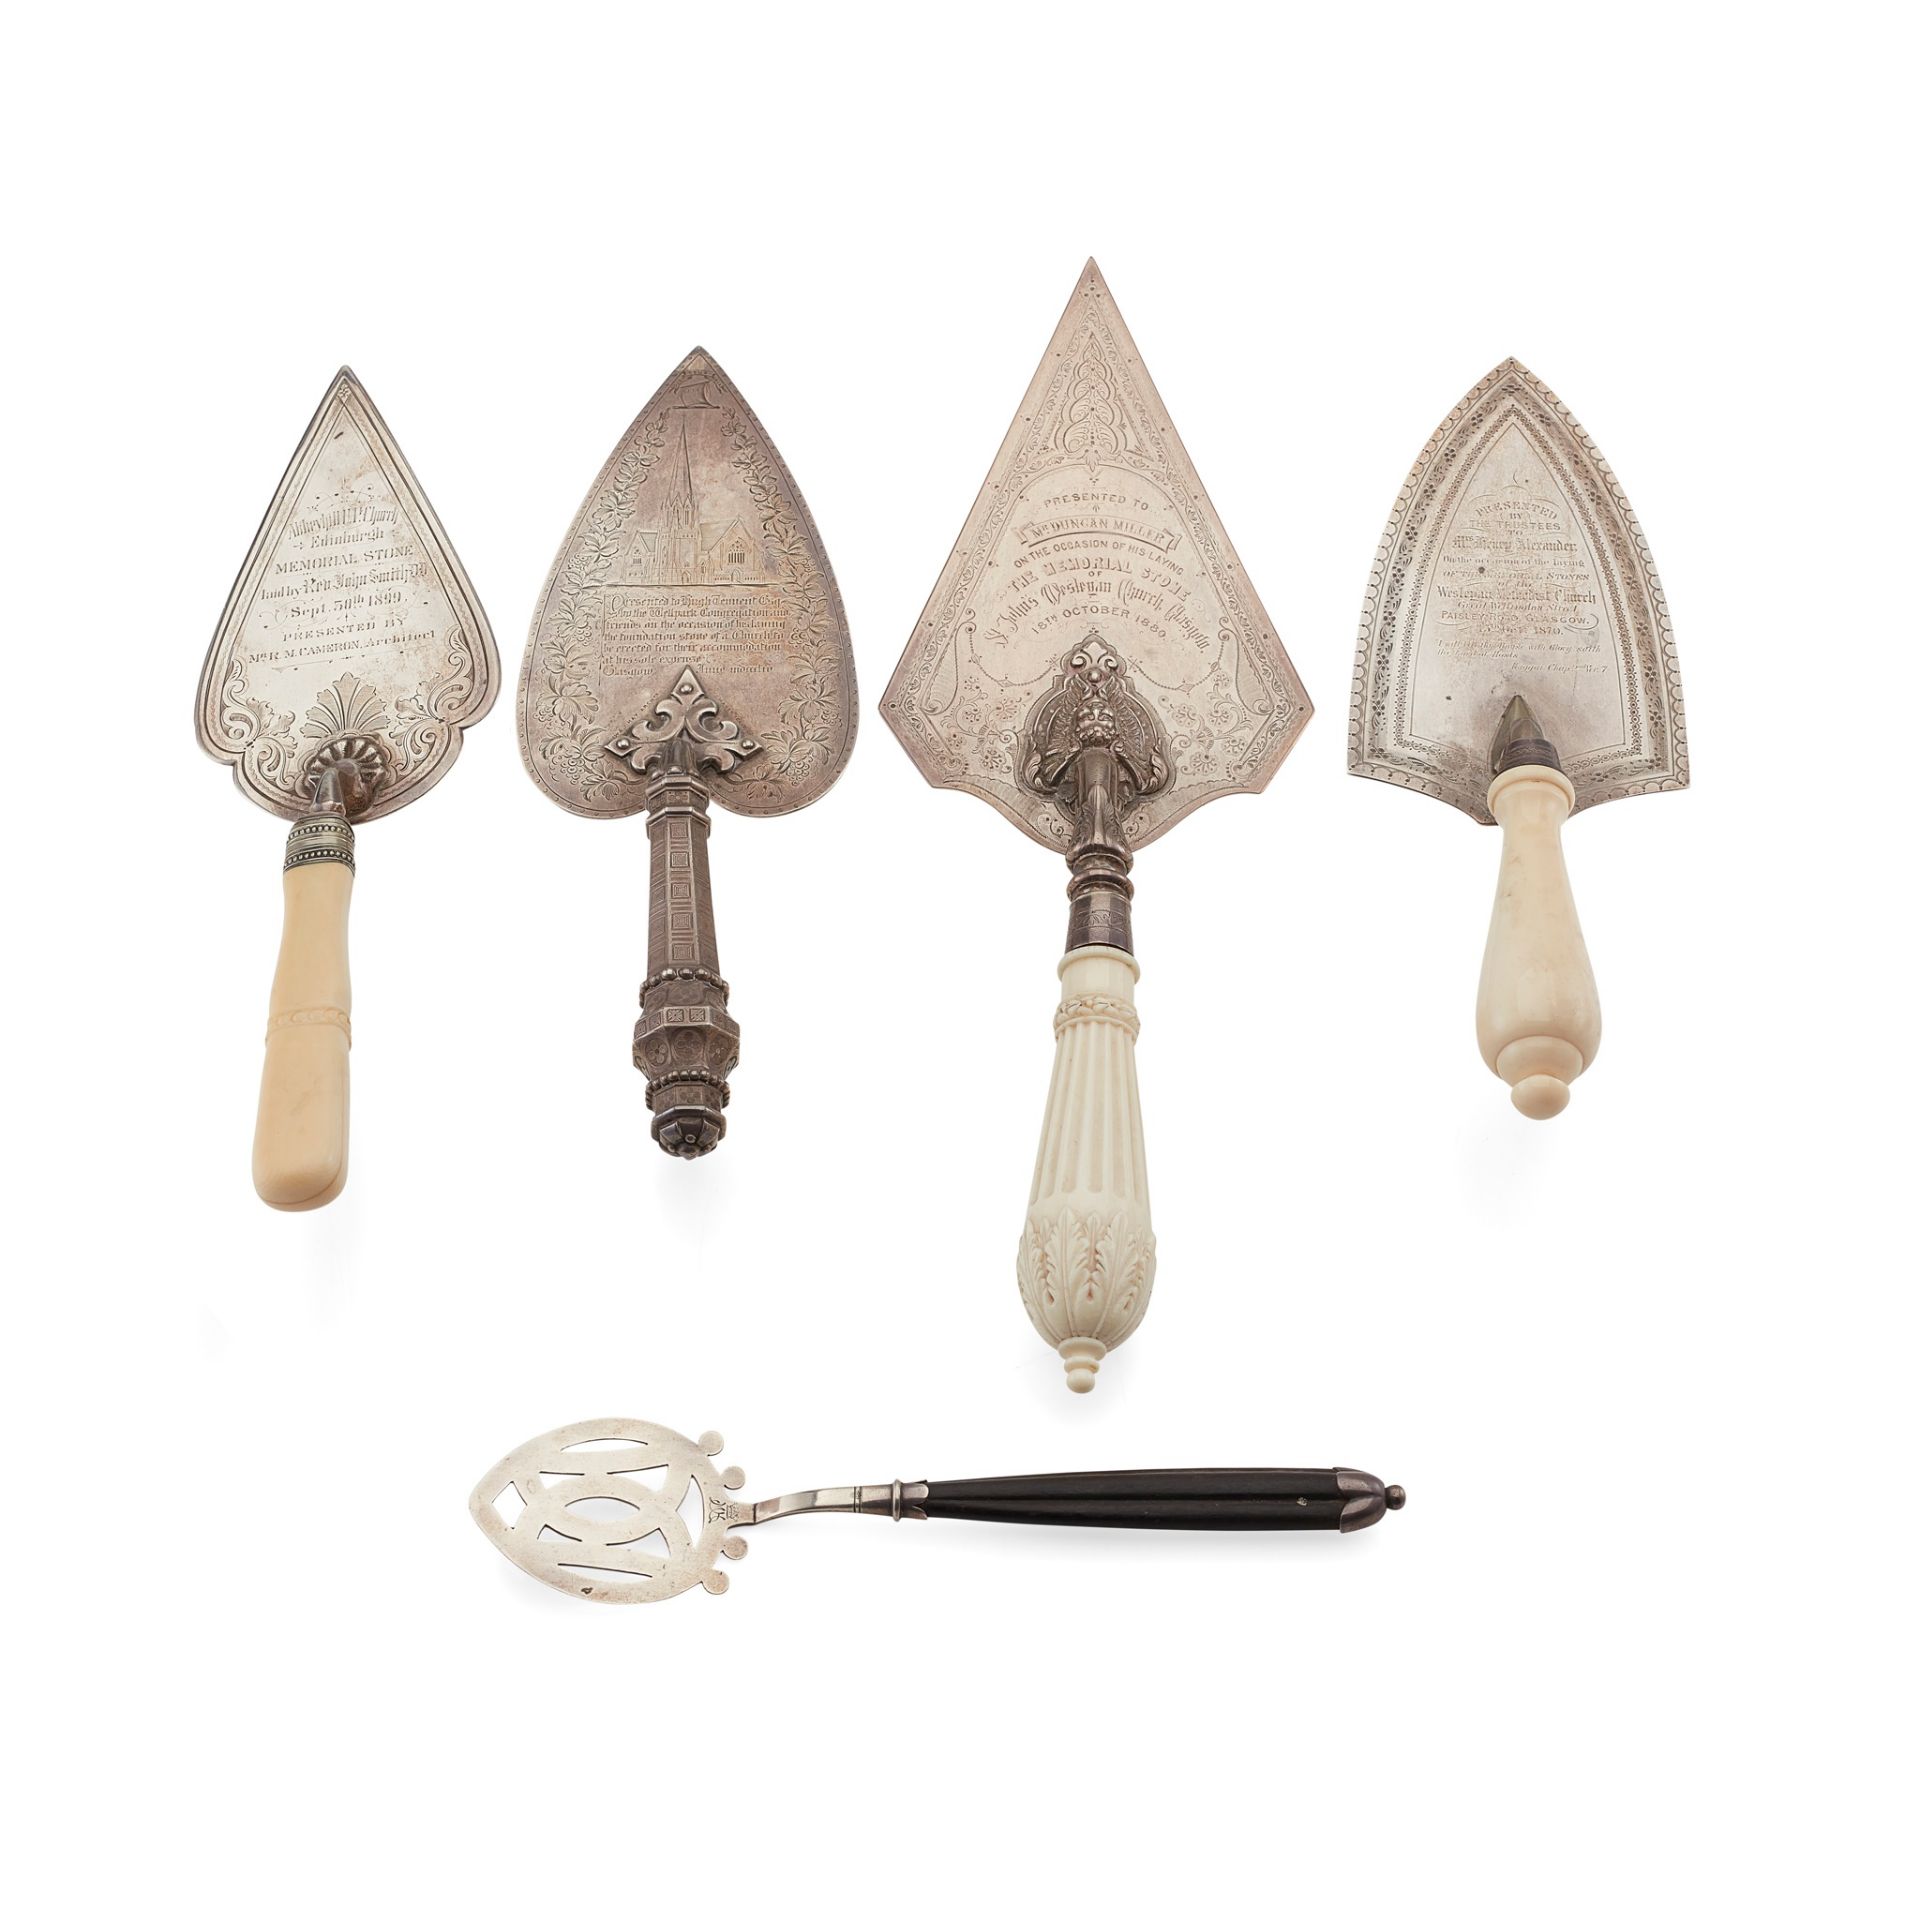 Y A GROUP OF THREE IVORY HANDLED FOUNDATION TROWELS 19TH CENTURY